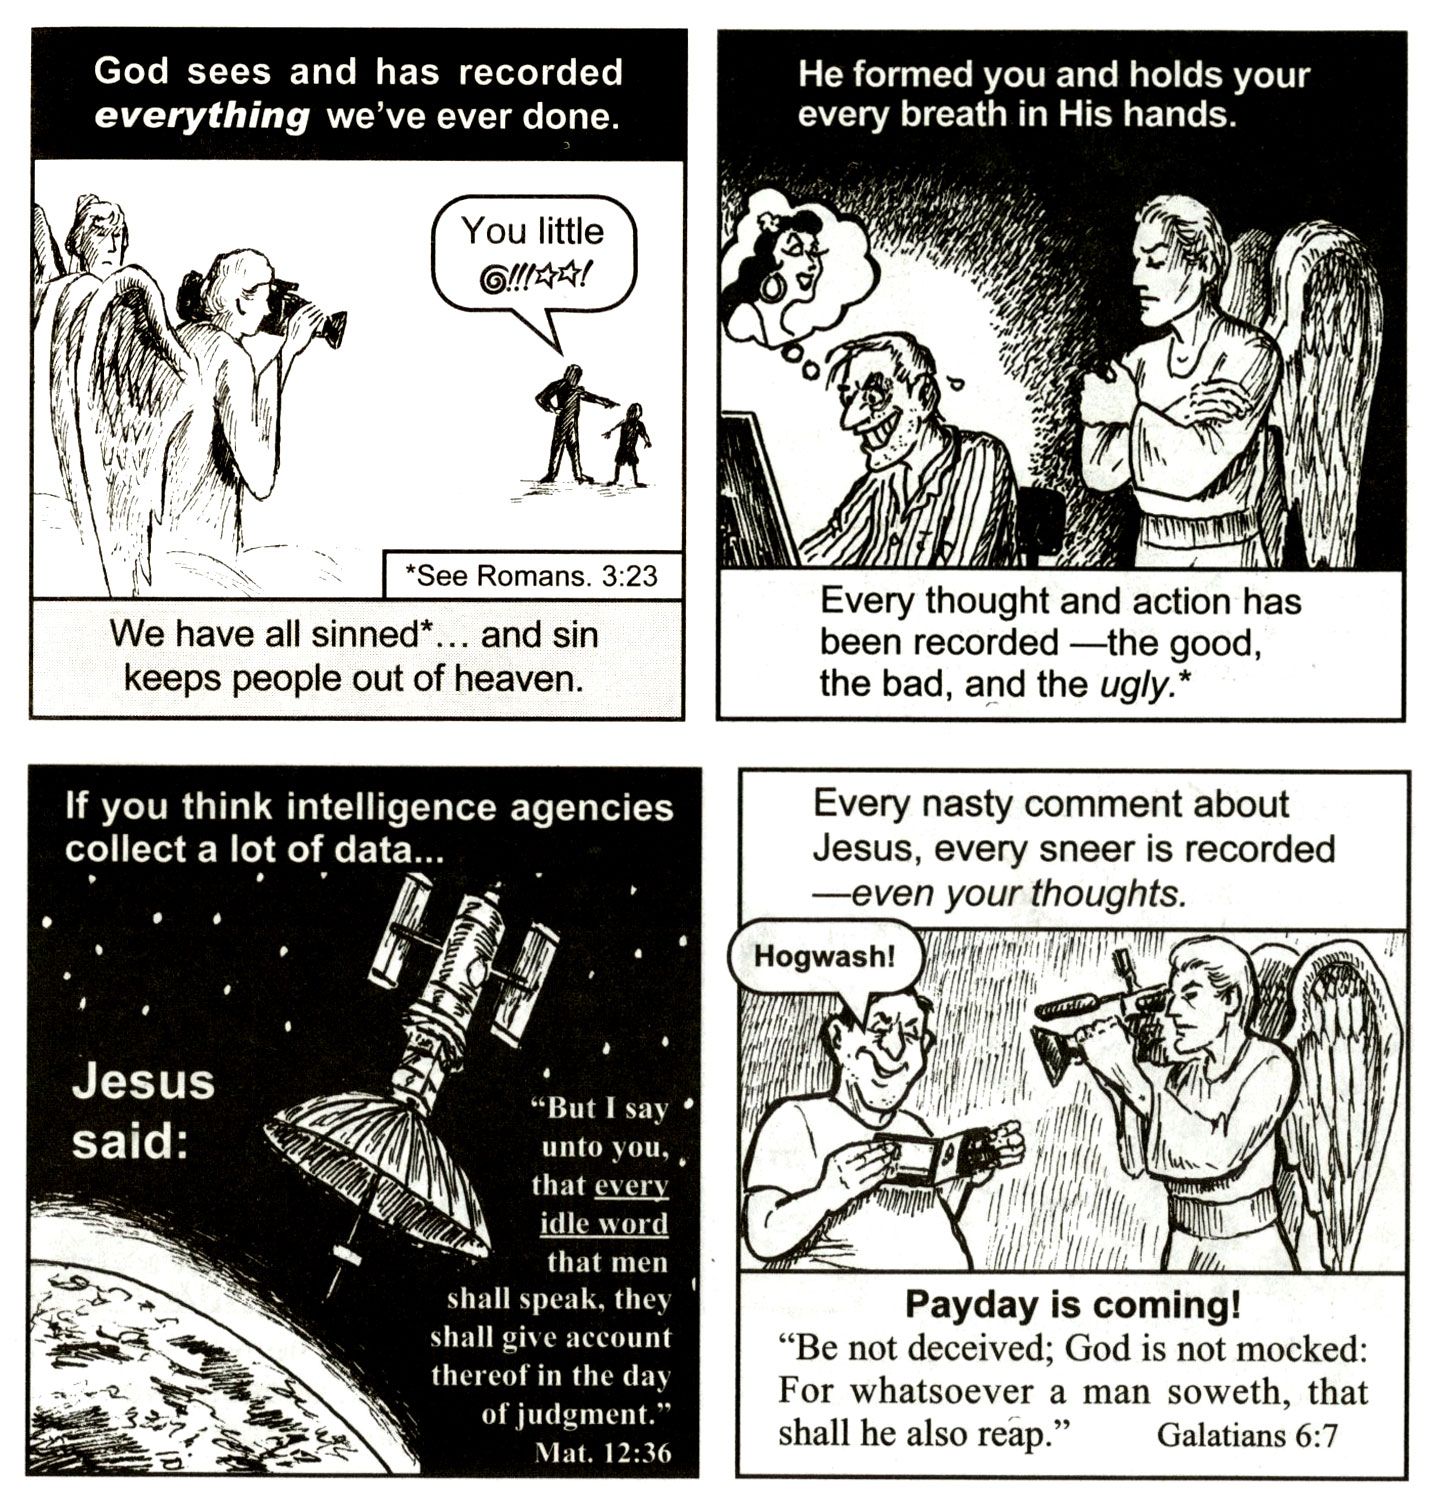 Chick Tract surveillance angels